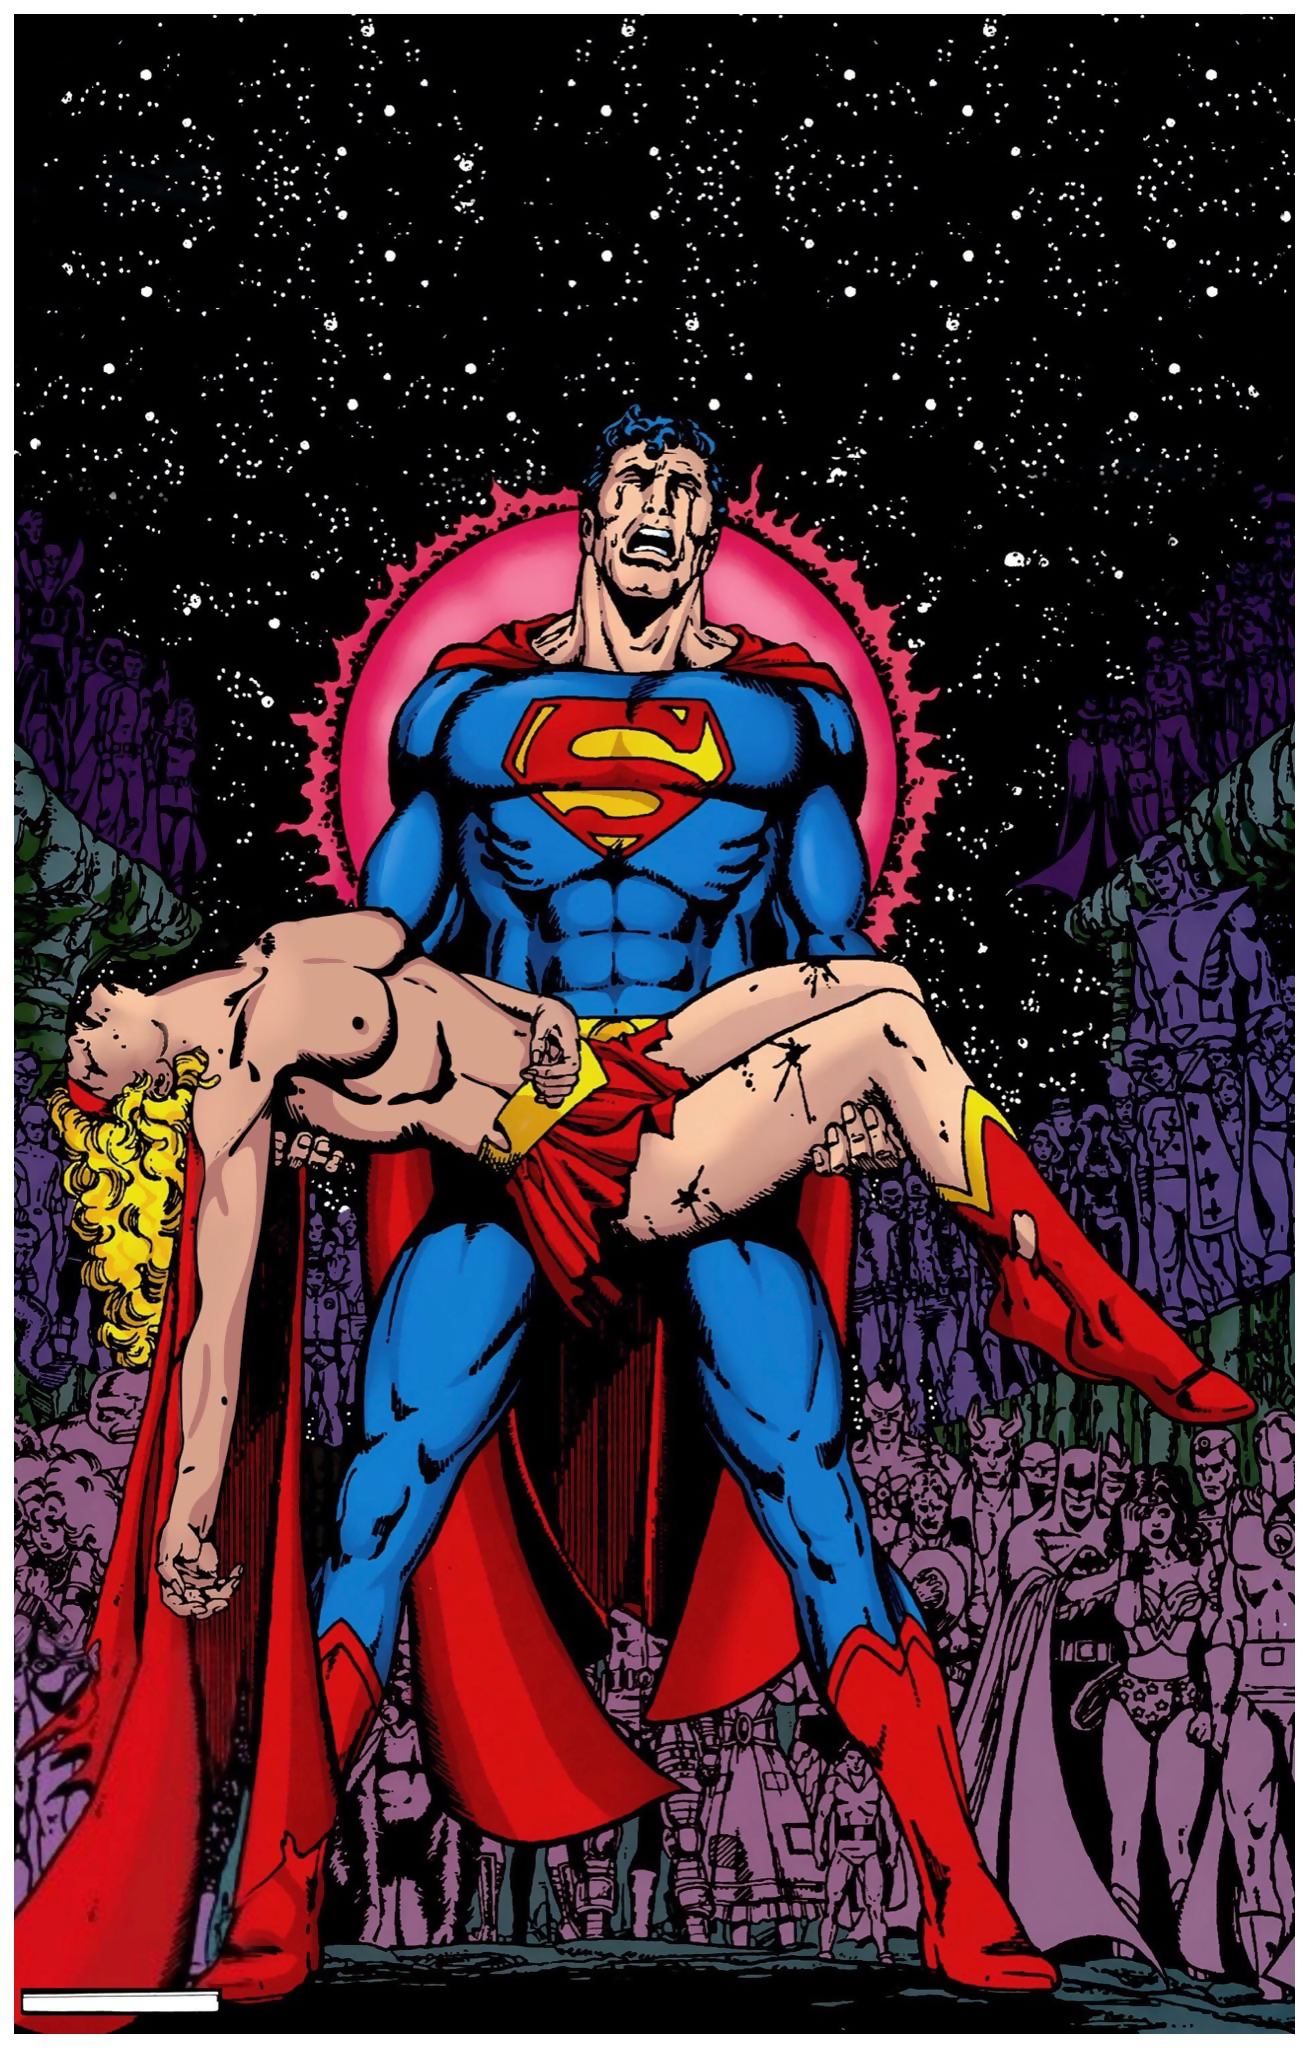 Superman â€¢ Supergirl - posted by nakedcomics